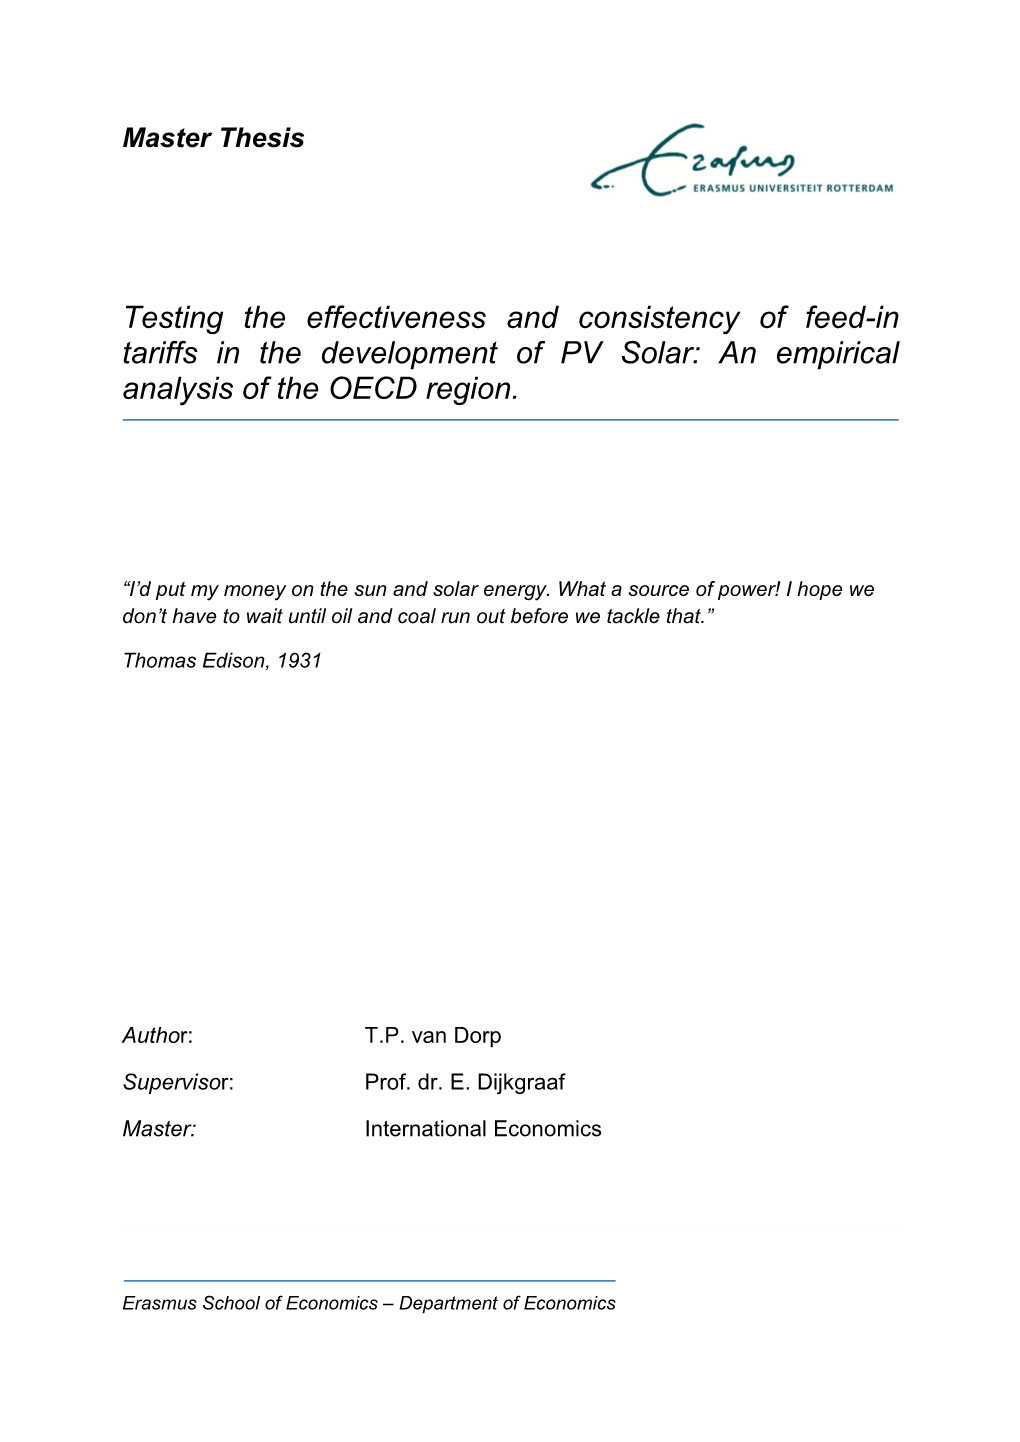 Testing the Effectiveness and Consistency of Feed-In Tariffs in the Development of PV Solar: an Empirical Analysis of the OECD Region